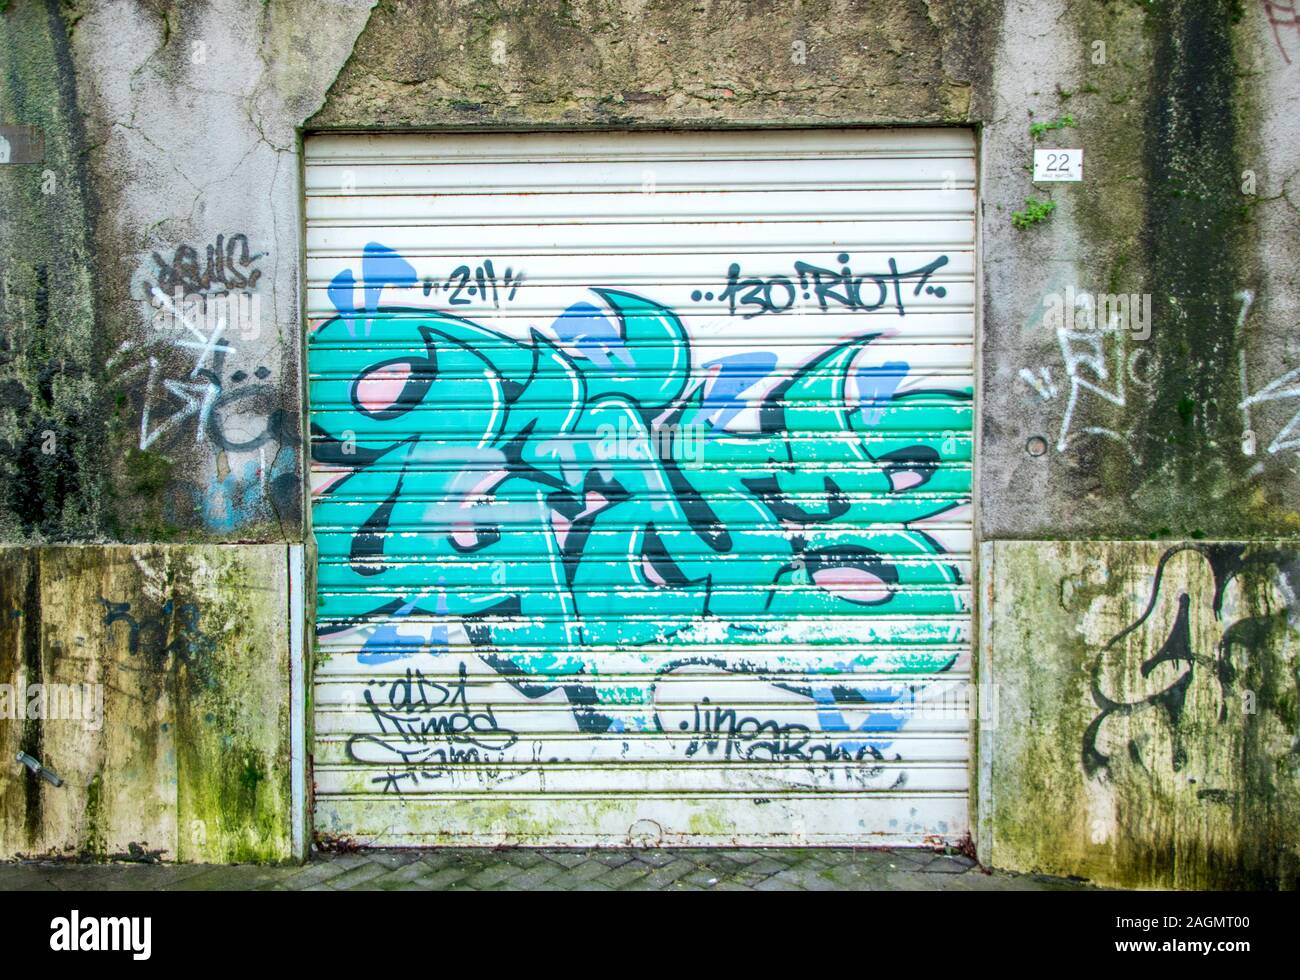 Graffiti on the walls of a beutiful town called Enna, in Sicily, Italy. Stock Photo